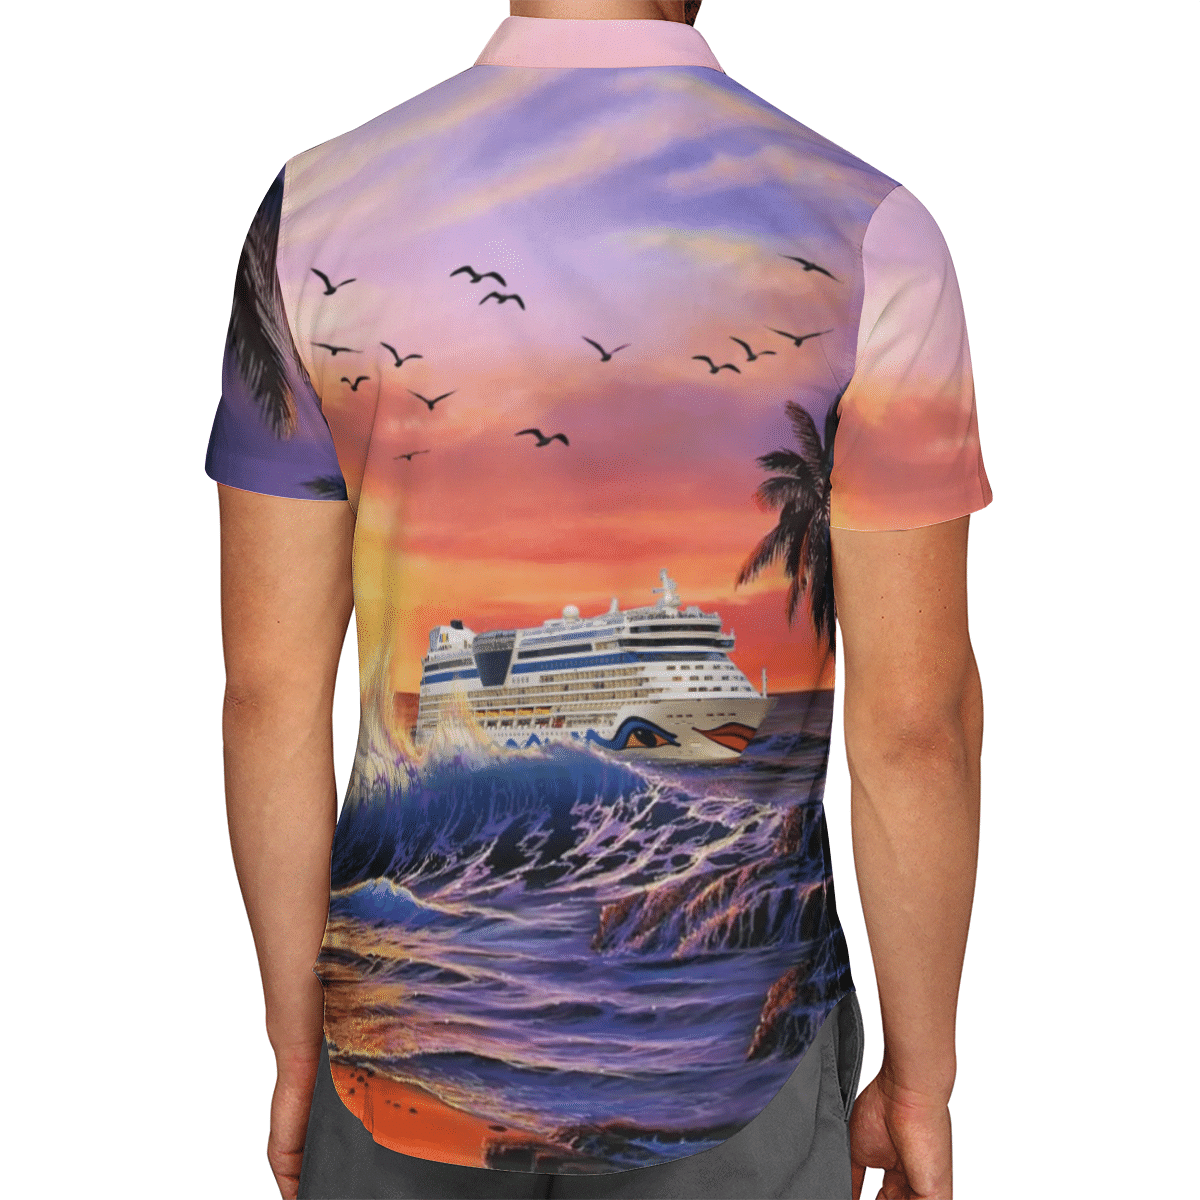 Going to the beach with a quality shirt 89